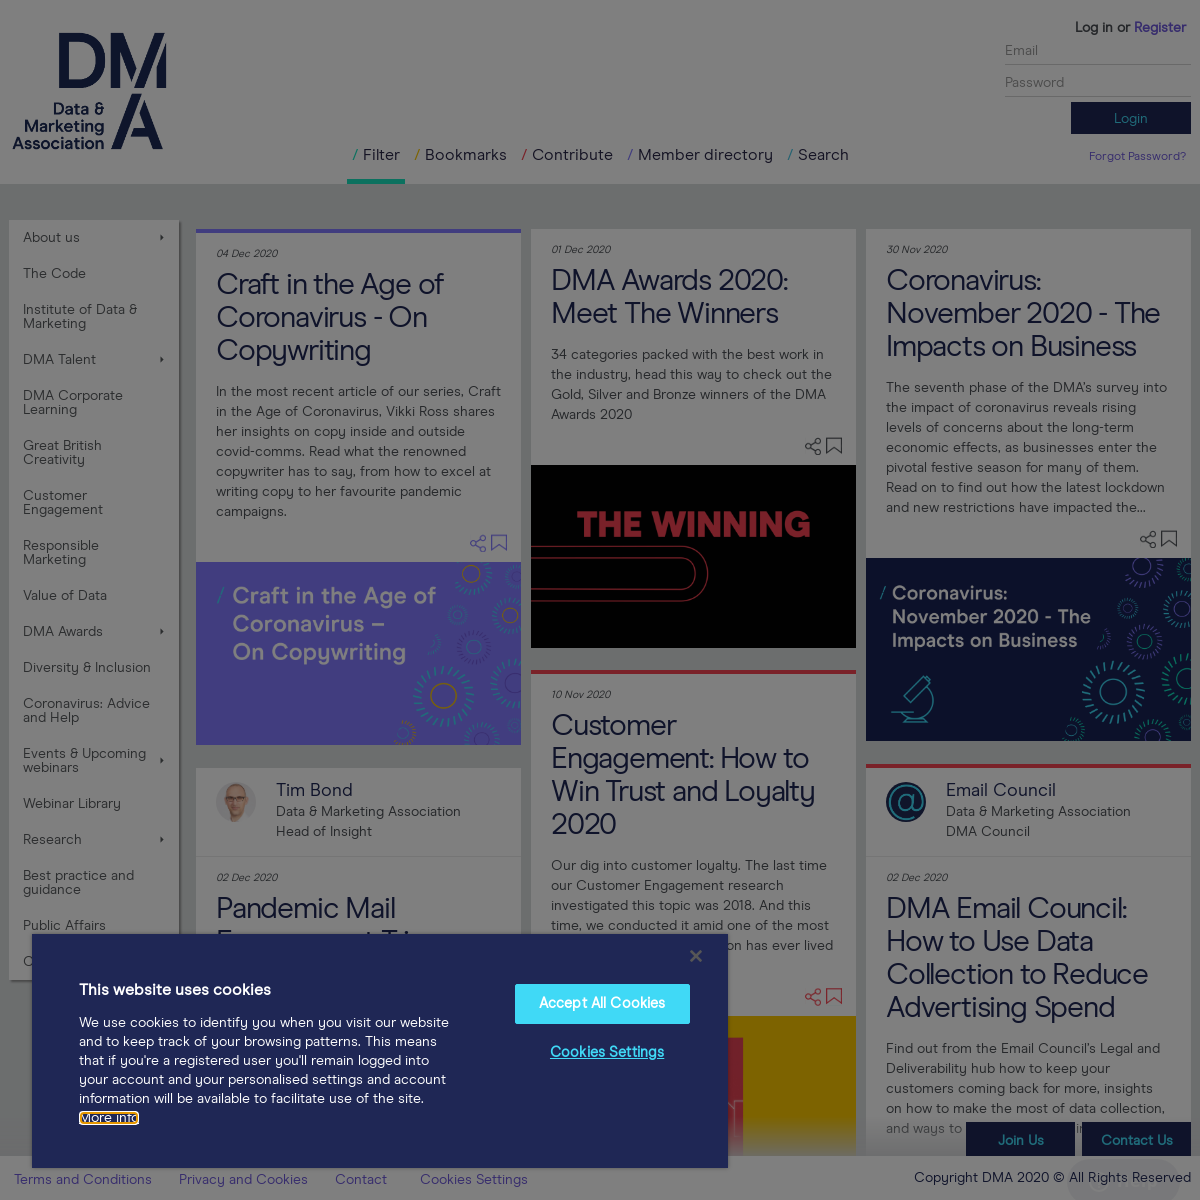 A complete backup of dma.org.uk